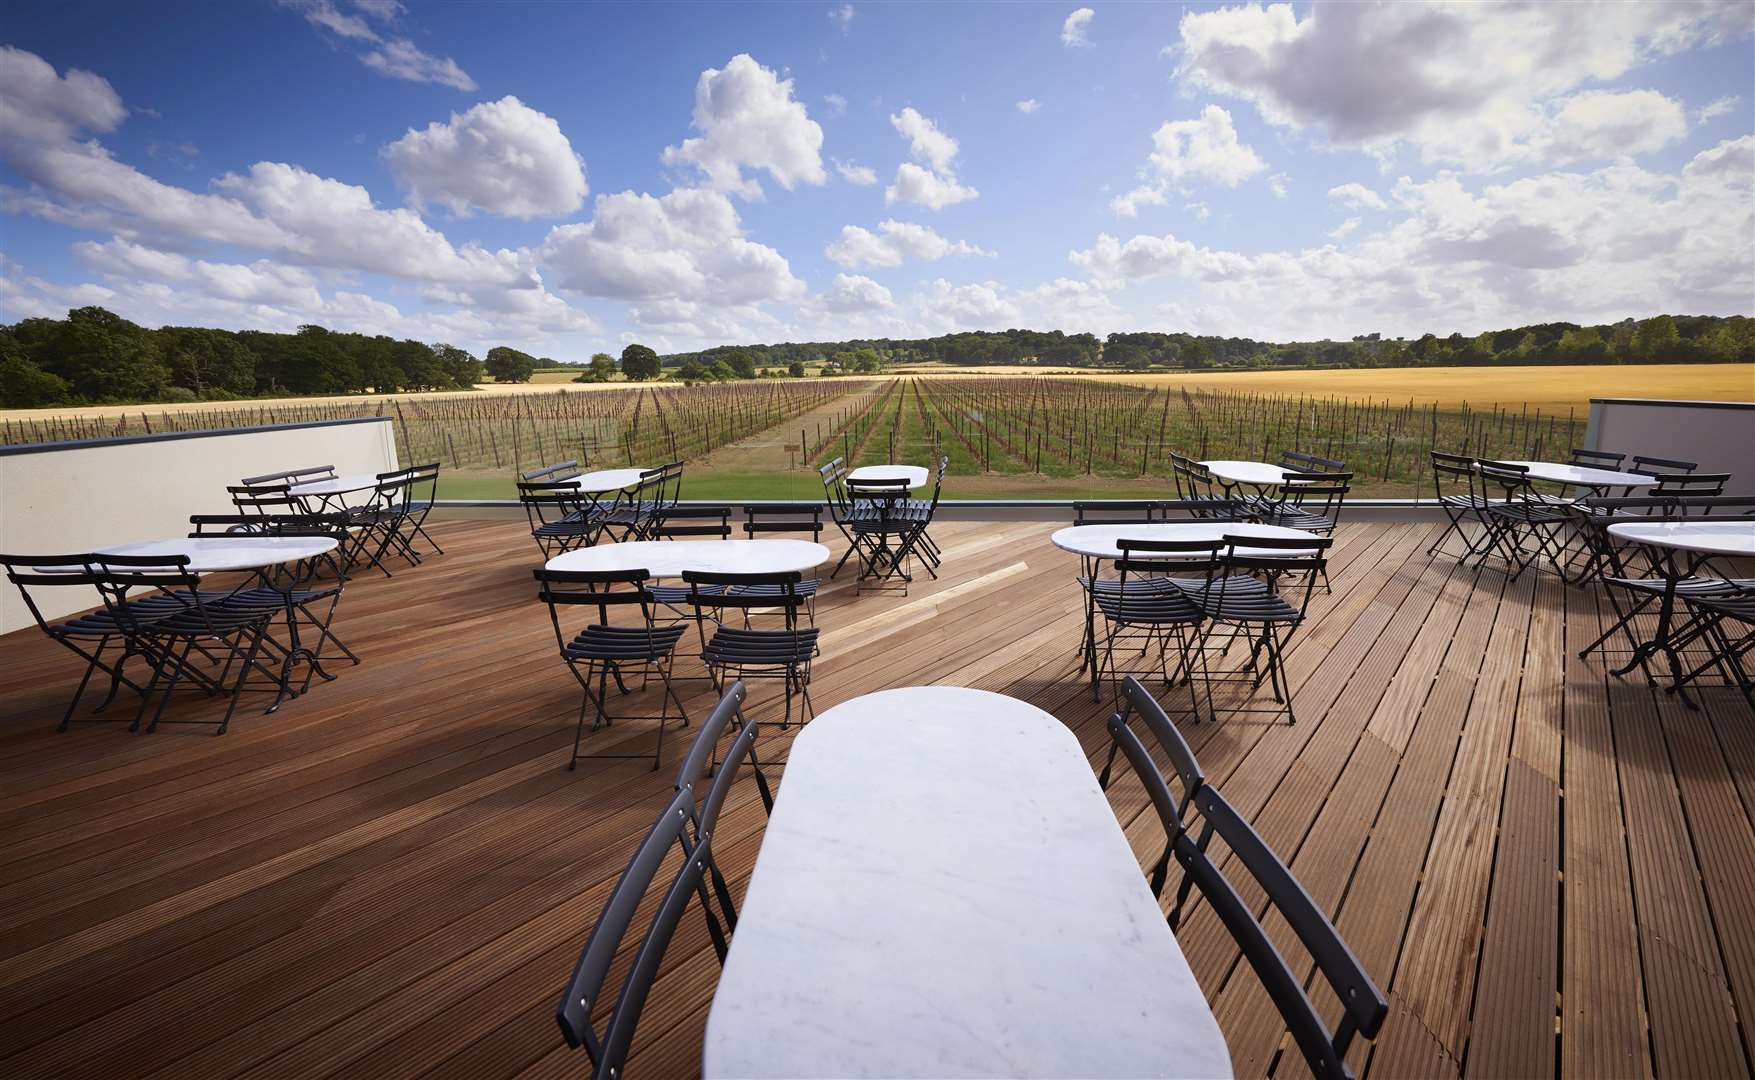 Take in the view at Hush Heath Winery